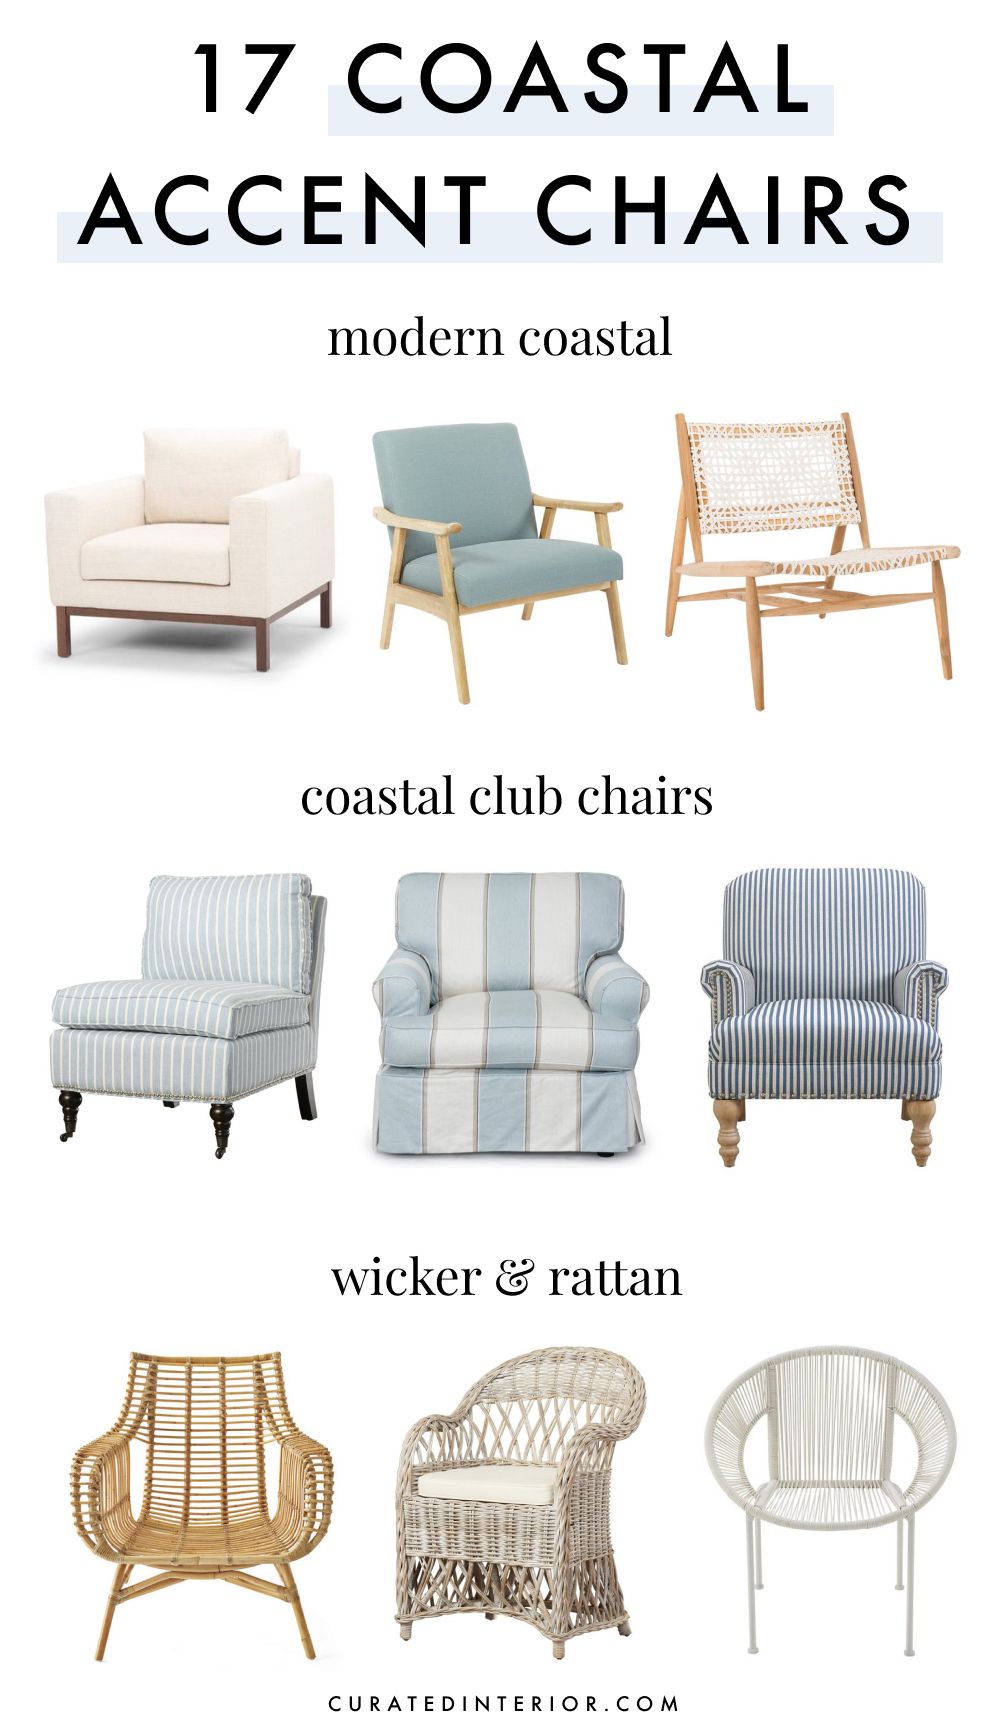 17 Coastal Accent Chairs